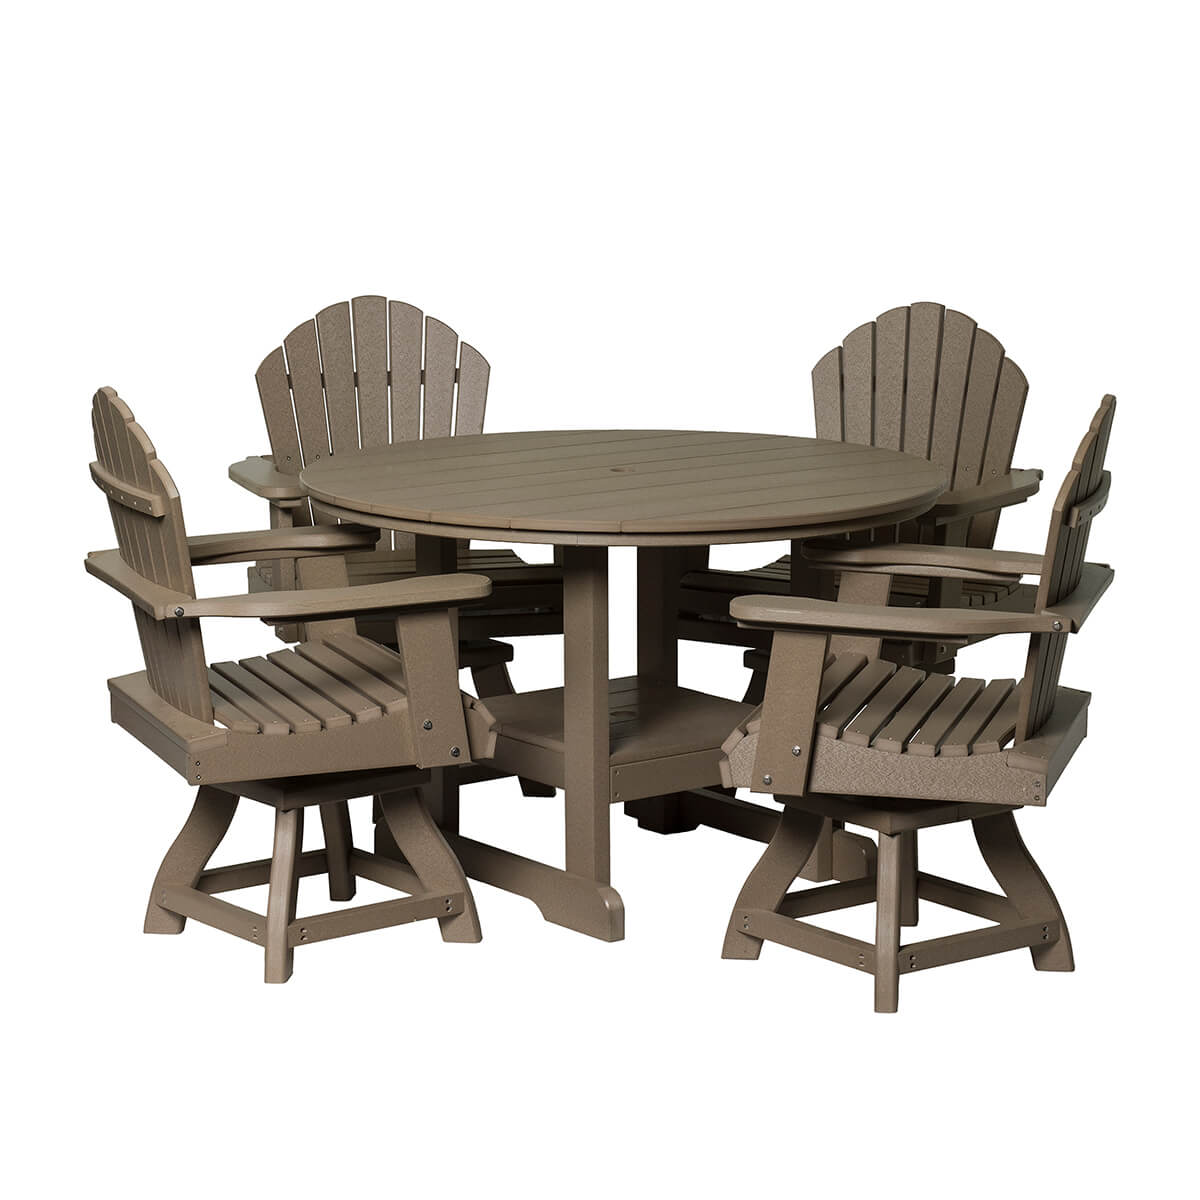 outdoor furniture tables chairs